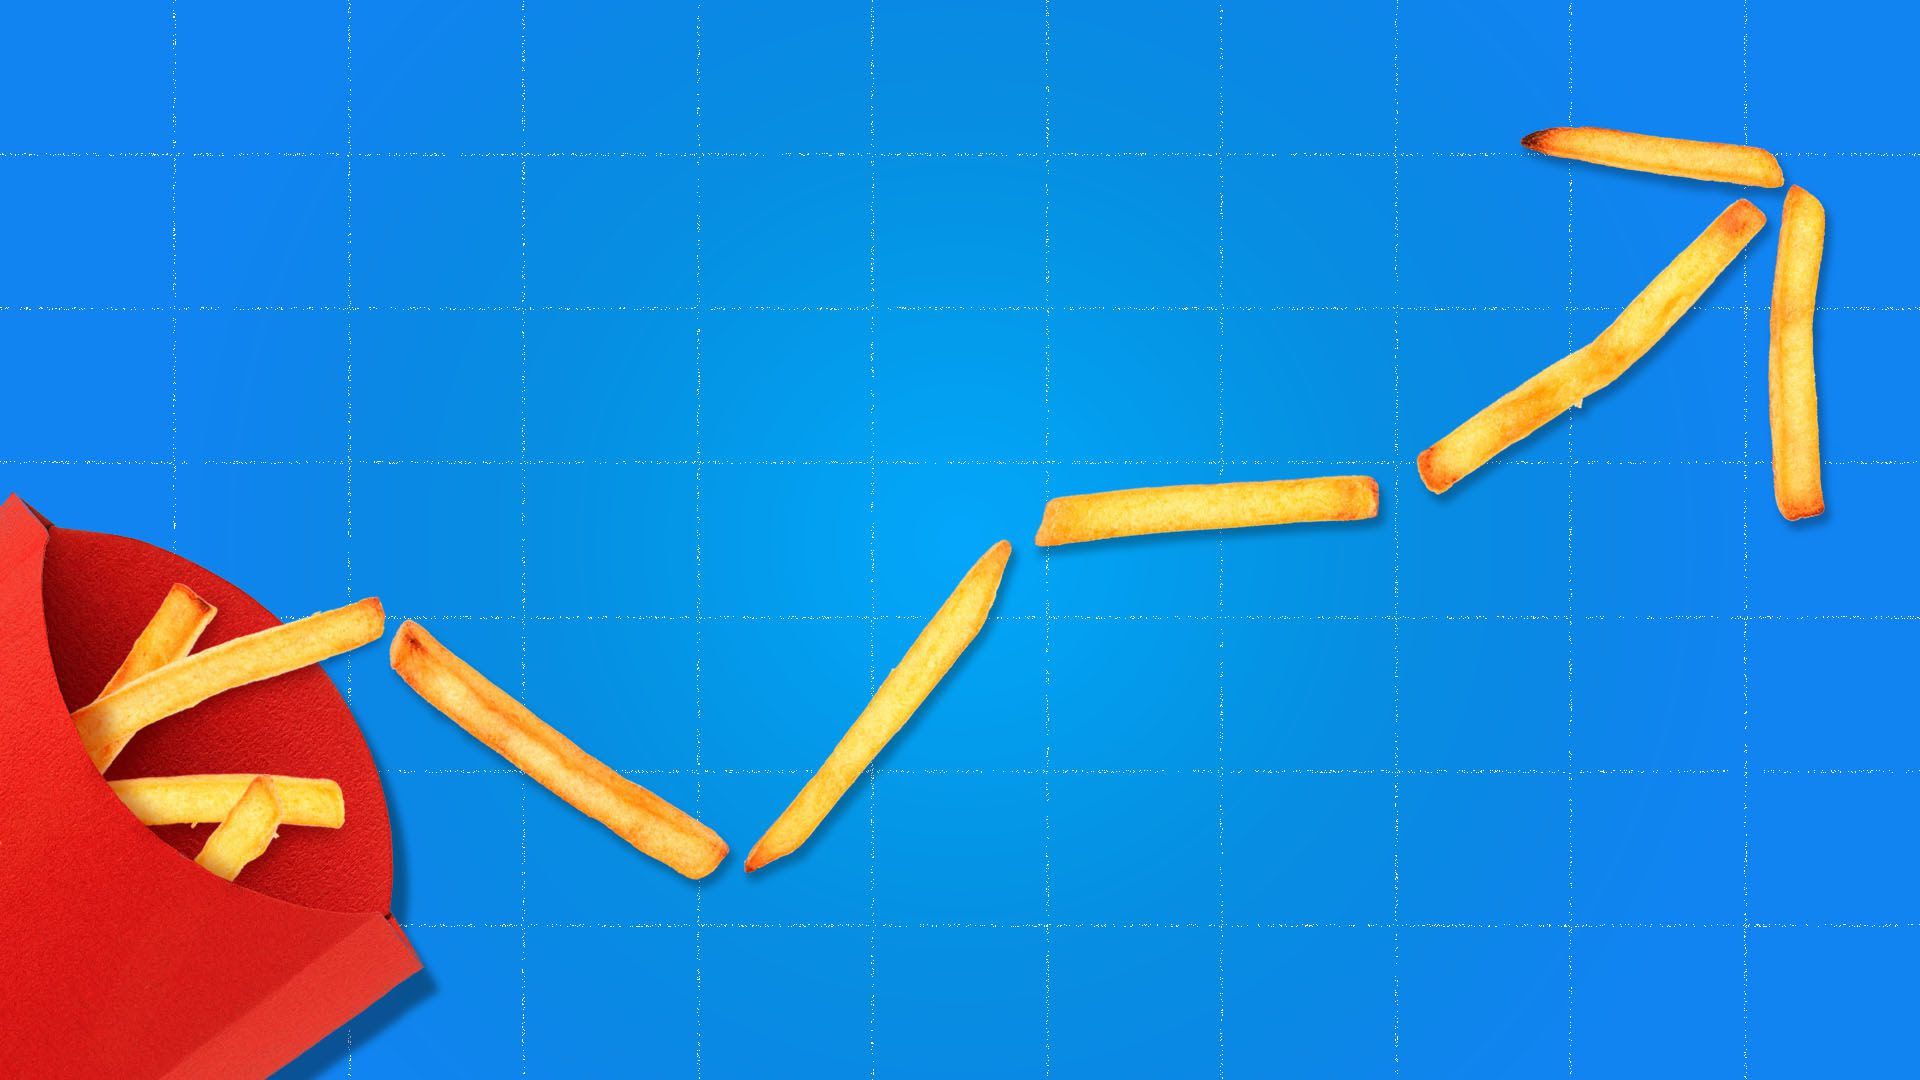 French fries in an arrow pointing up